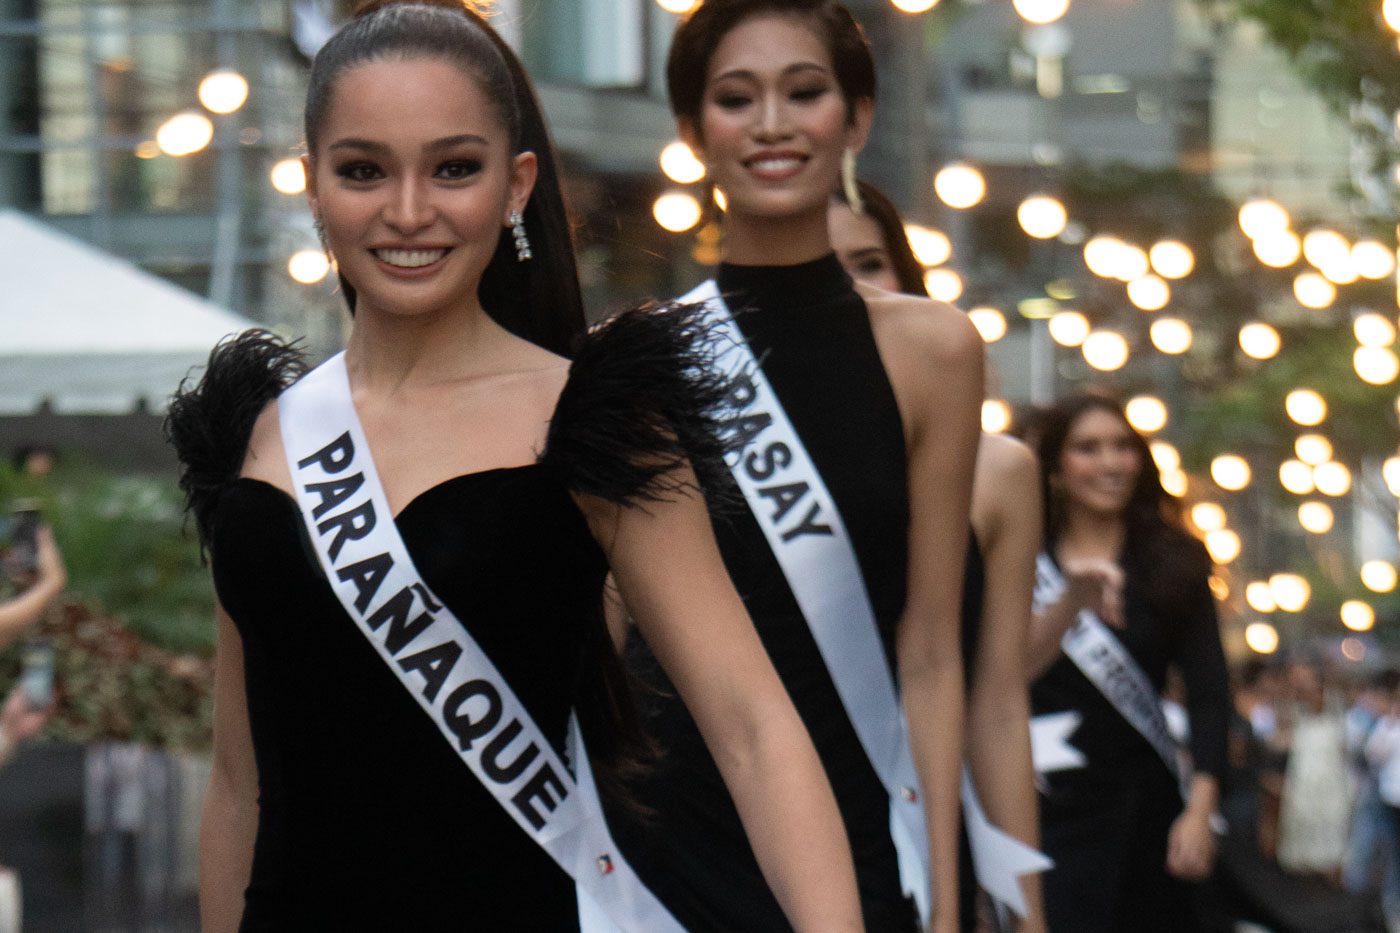 IN PHOTOS: The Miss Universe Philippines 2020 candidates at the runway challenge